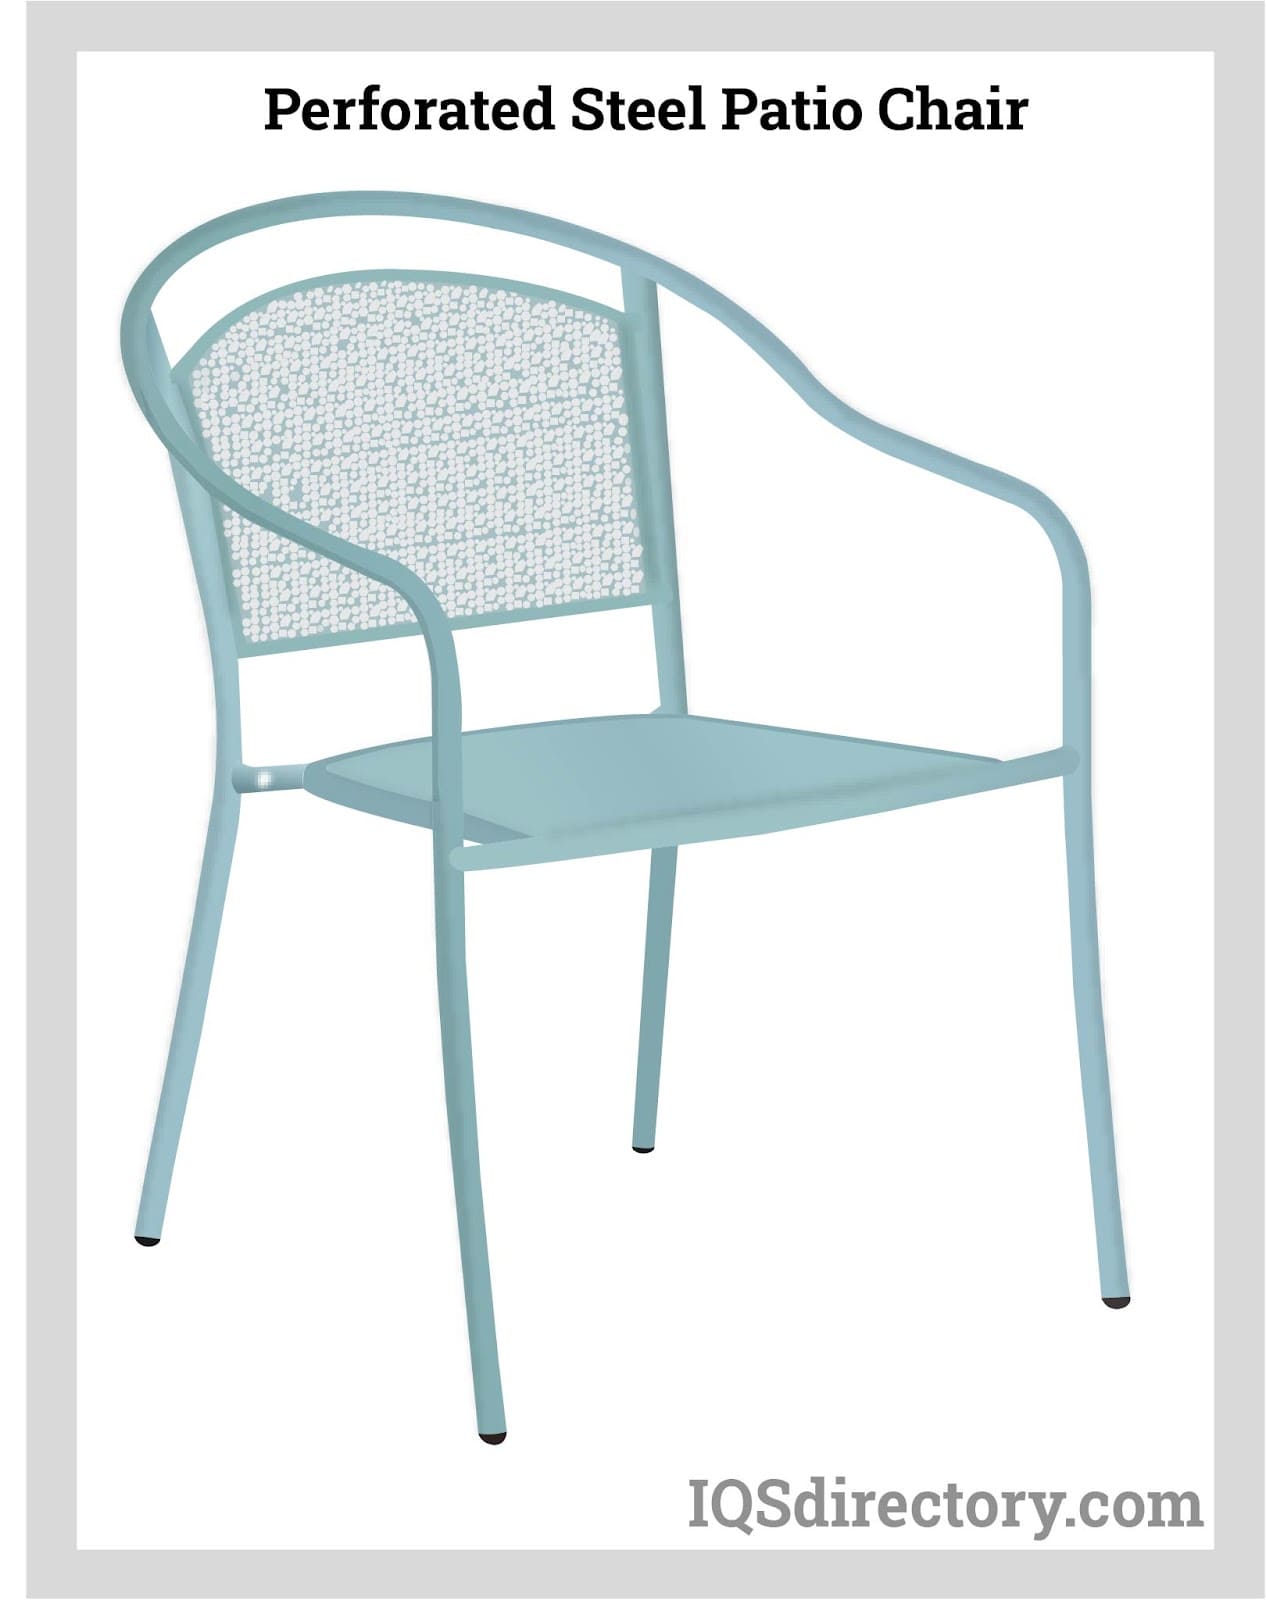 Perforated Steel Patio Chair